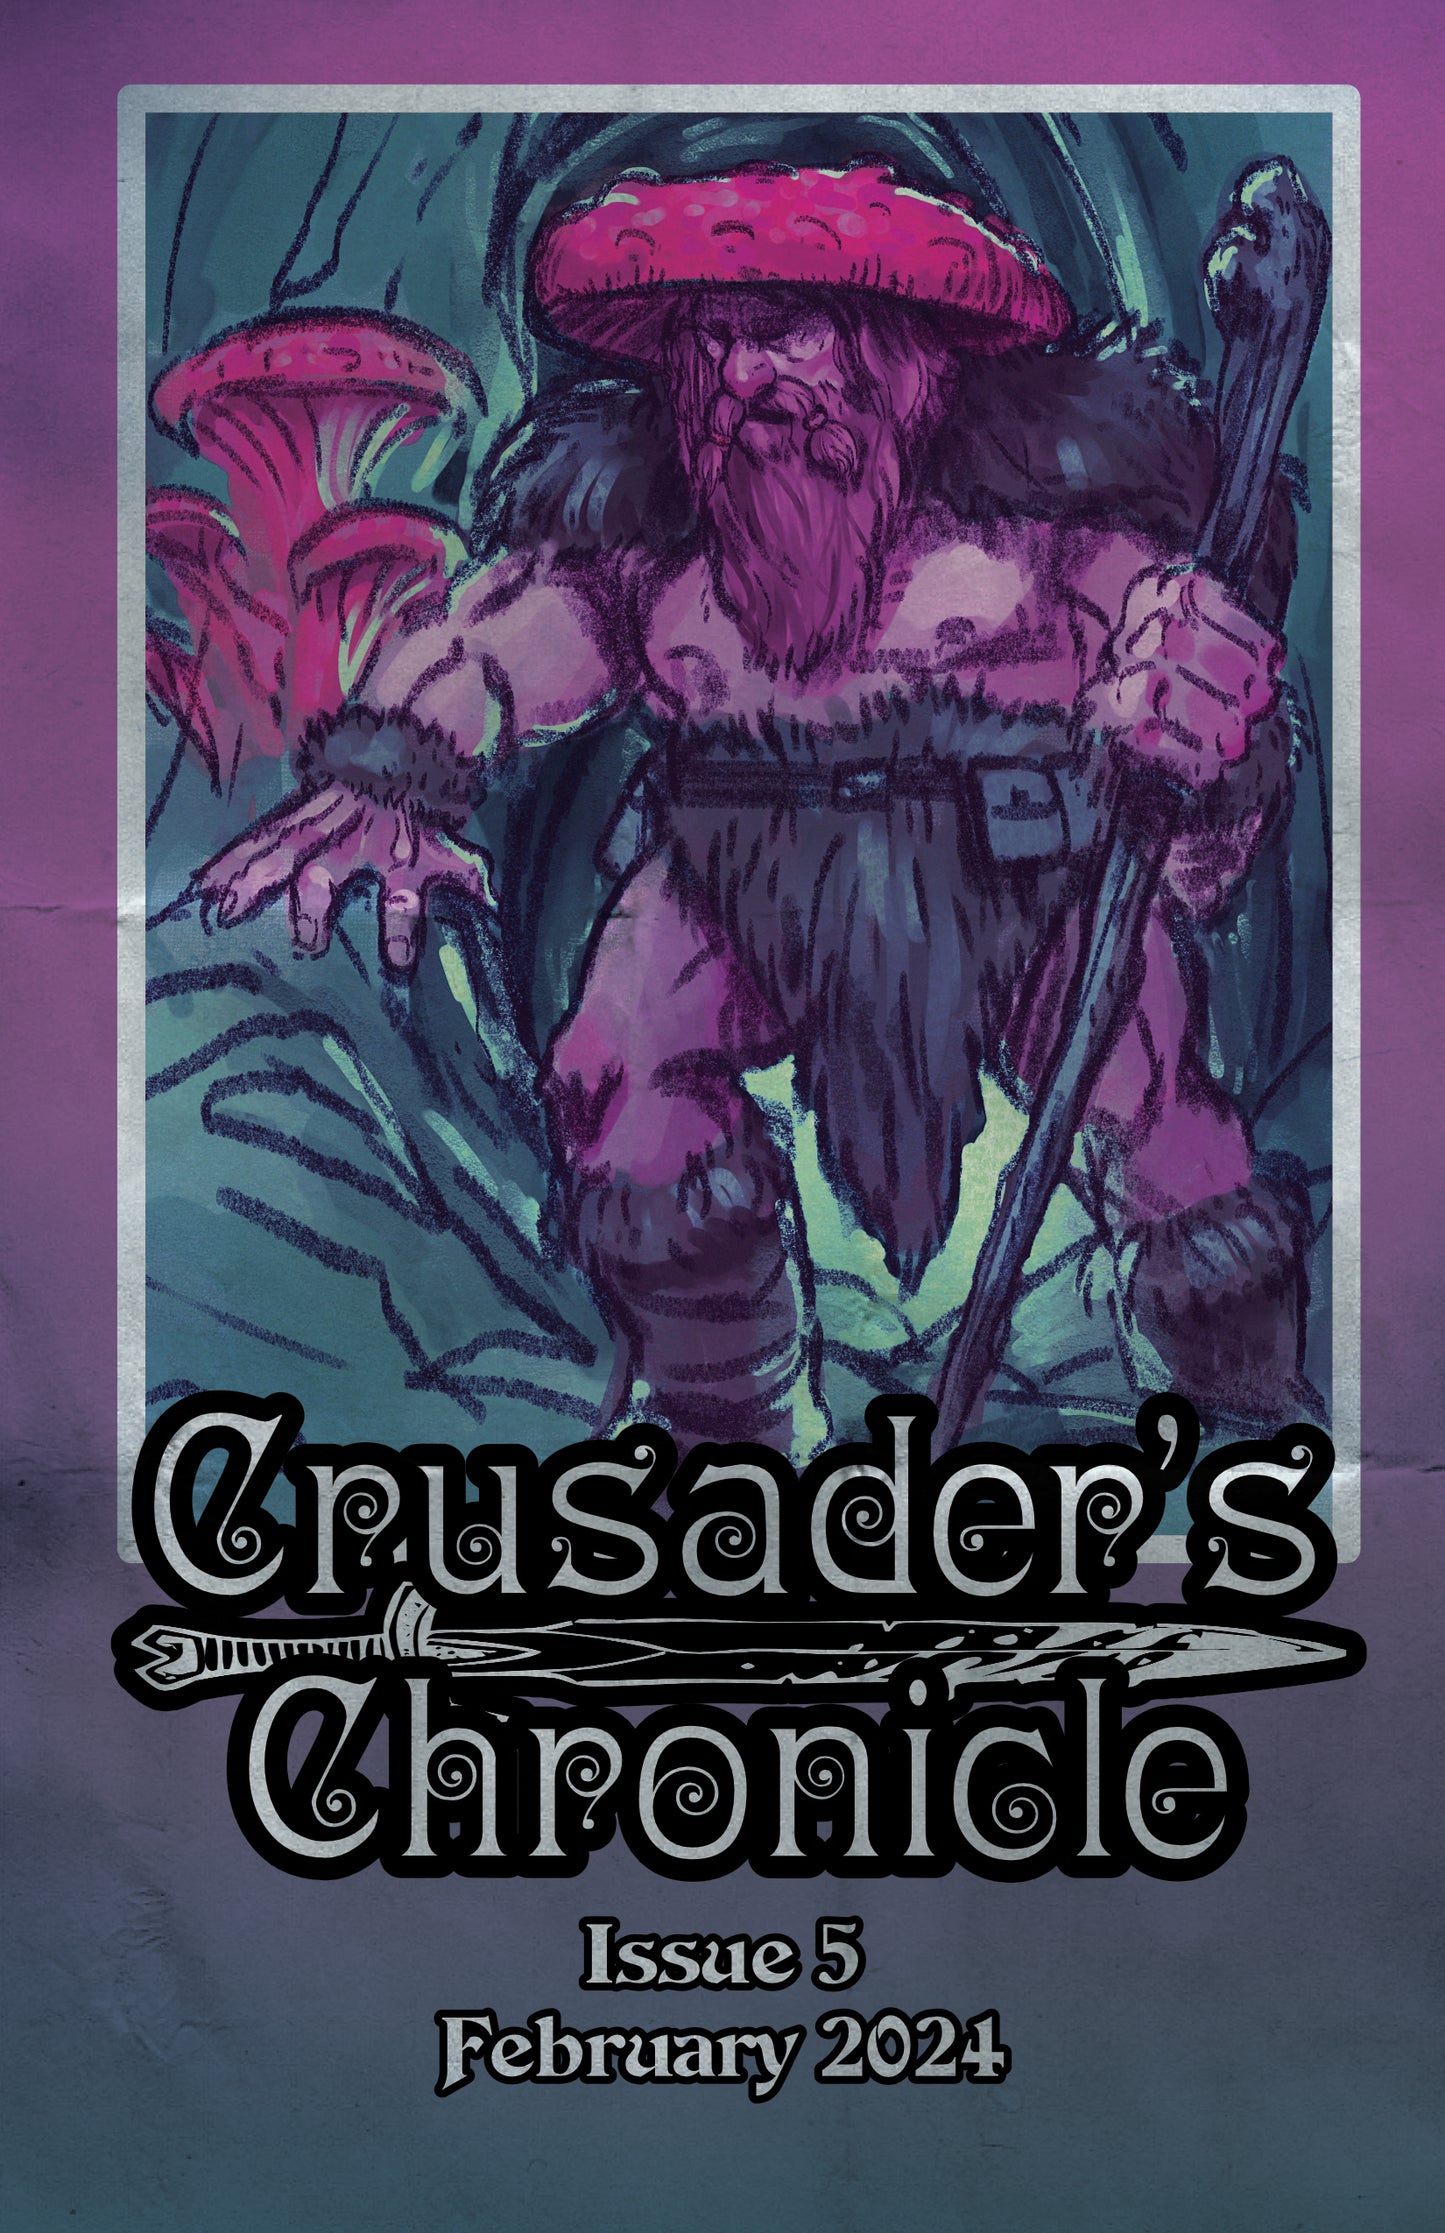 Crusader's Chronicle Issue 5 - February 2024 (PDF)